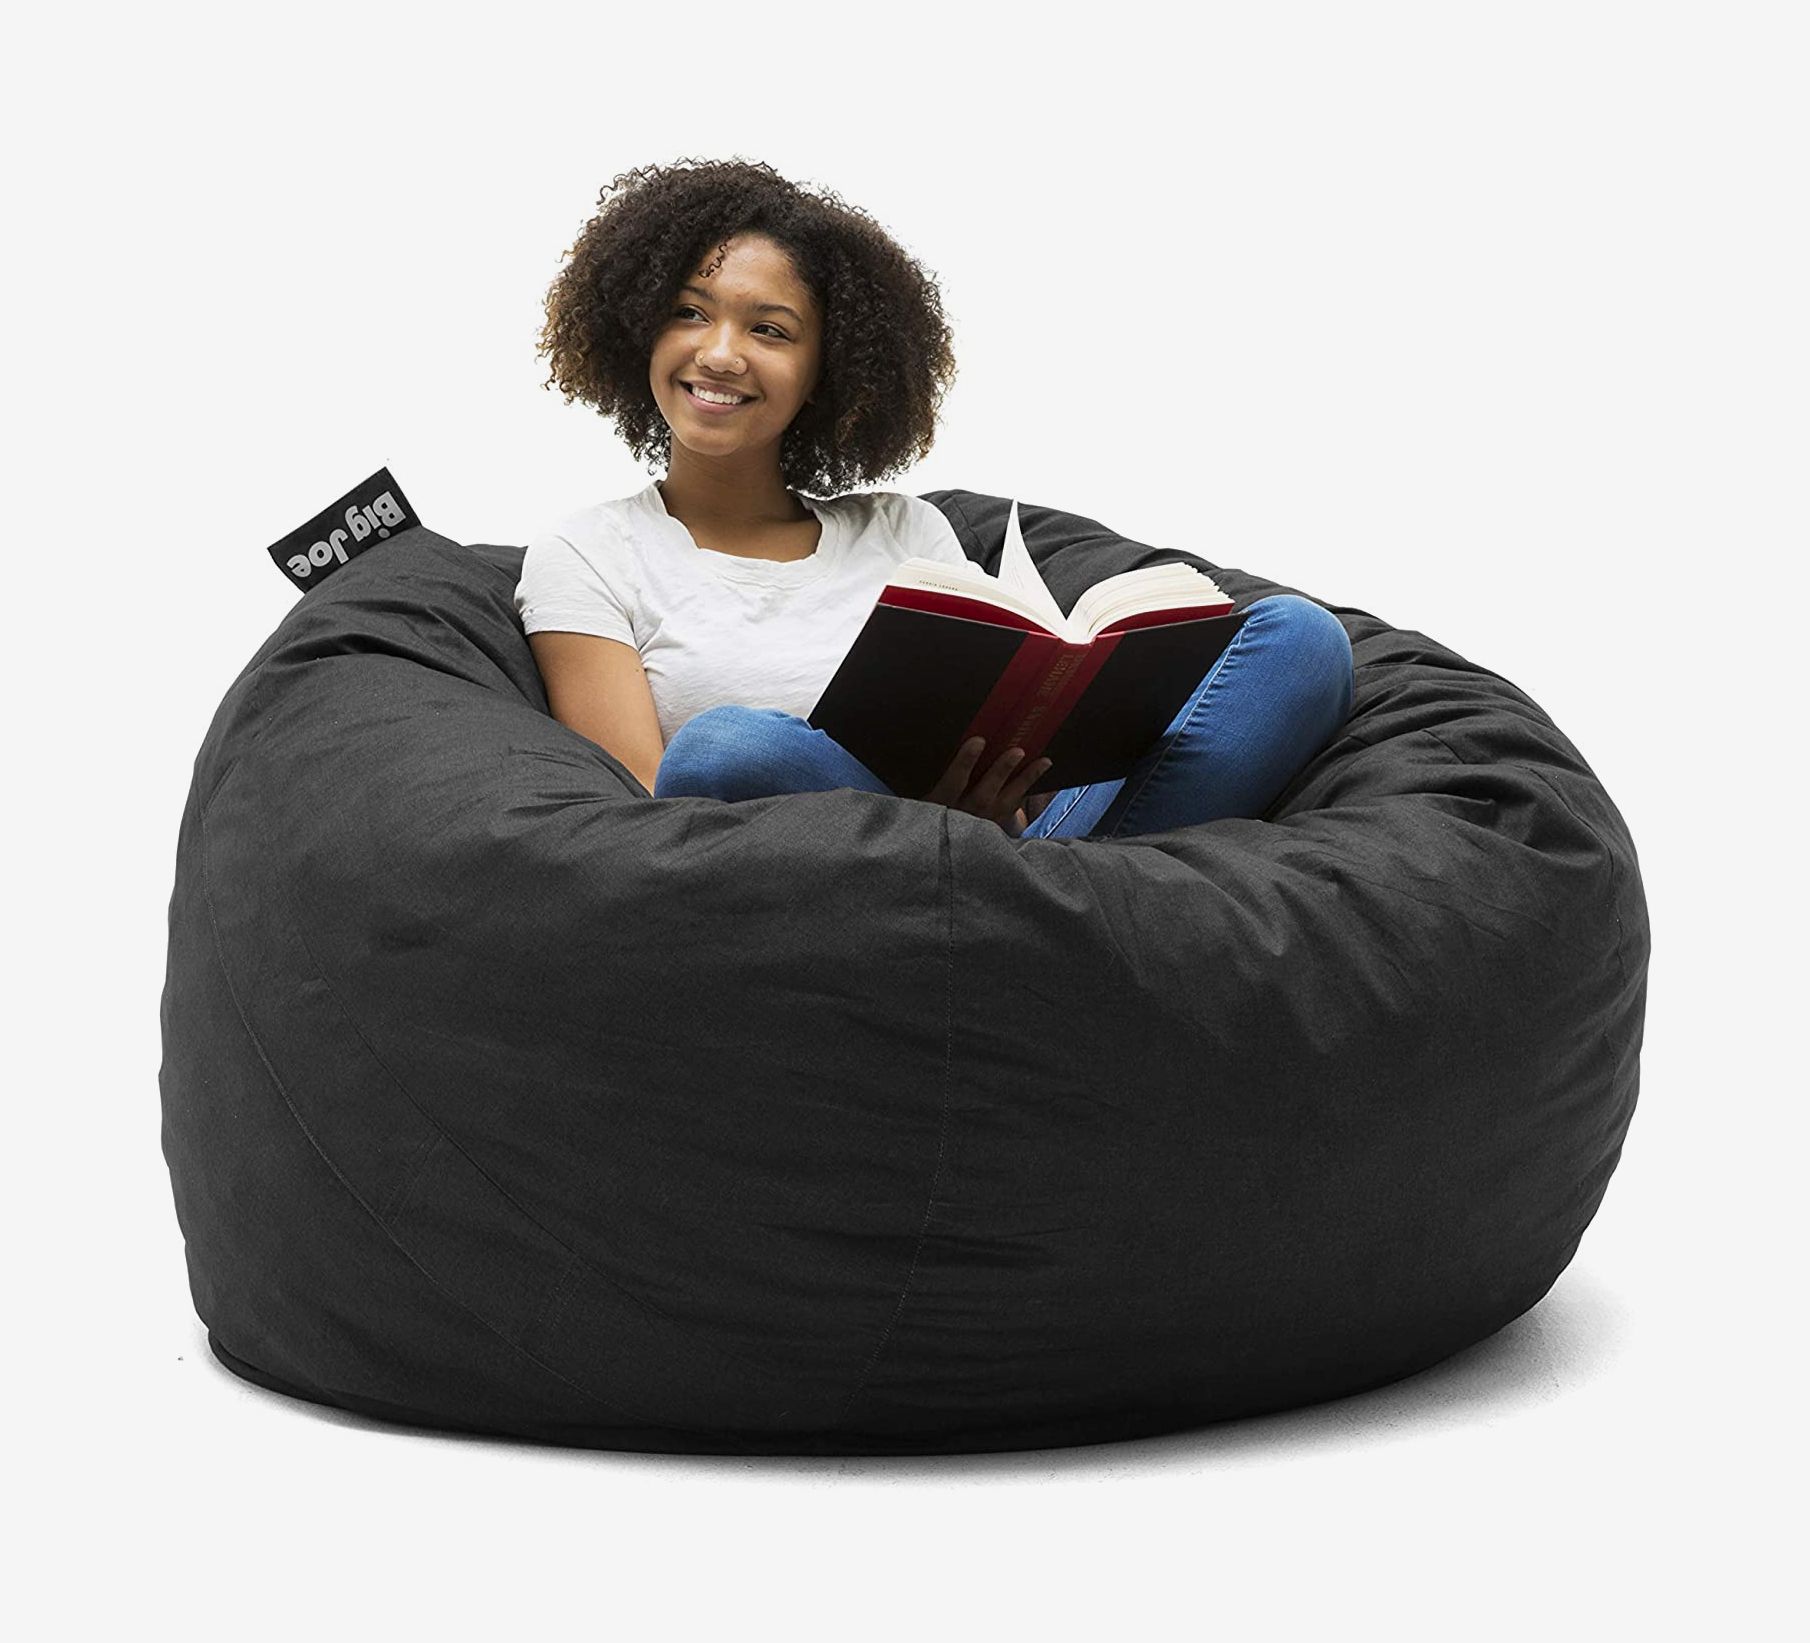 Reactor Fine income 10 Best Beanbag Chairs 2022 | The Strategist